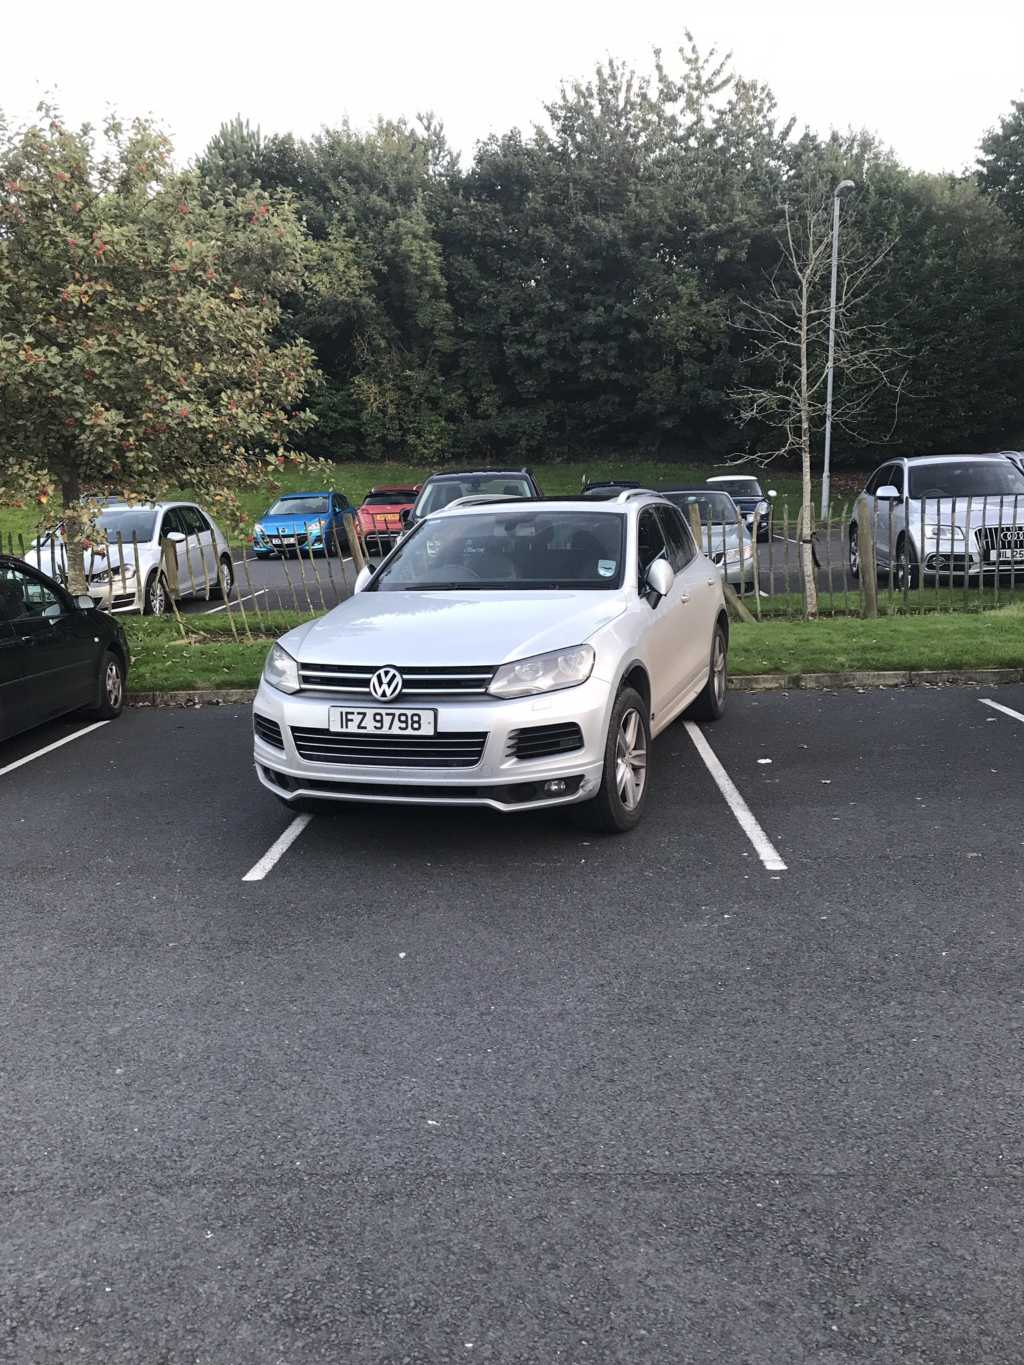 IFZ 9798 is an Inconsiderate Parker